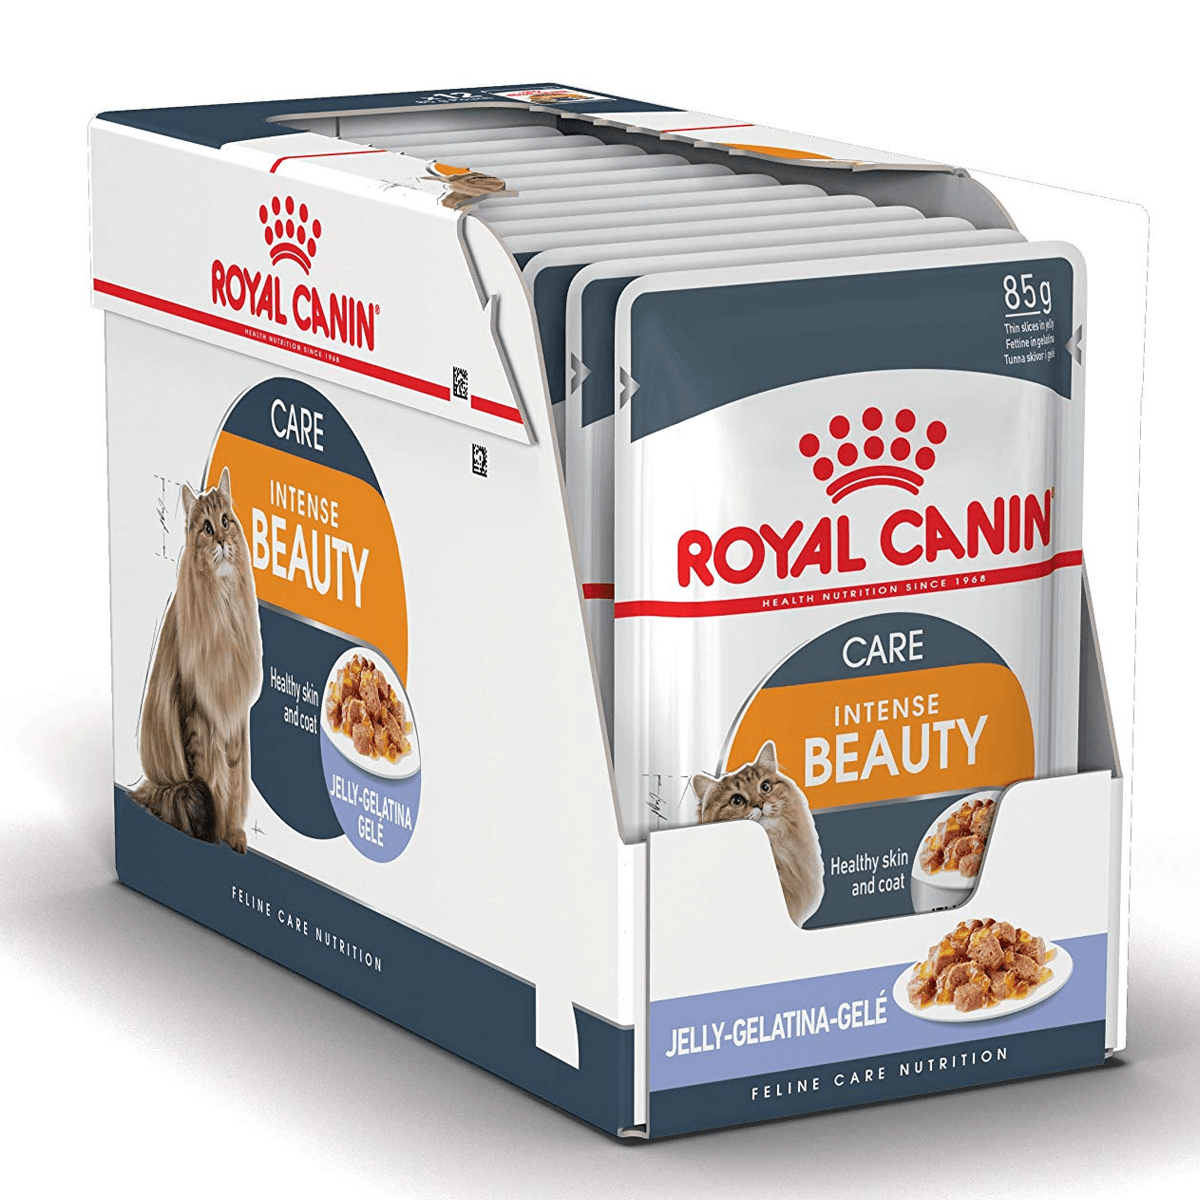 Royal Canin Cat Food Adult Intense Beauty in Jelly, Wet Food - 12 Pack x 85g Pouch - SnapZapp